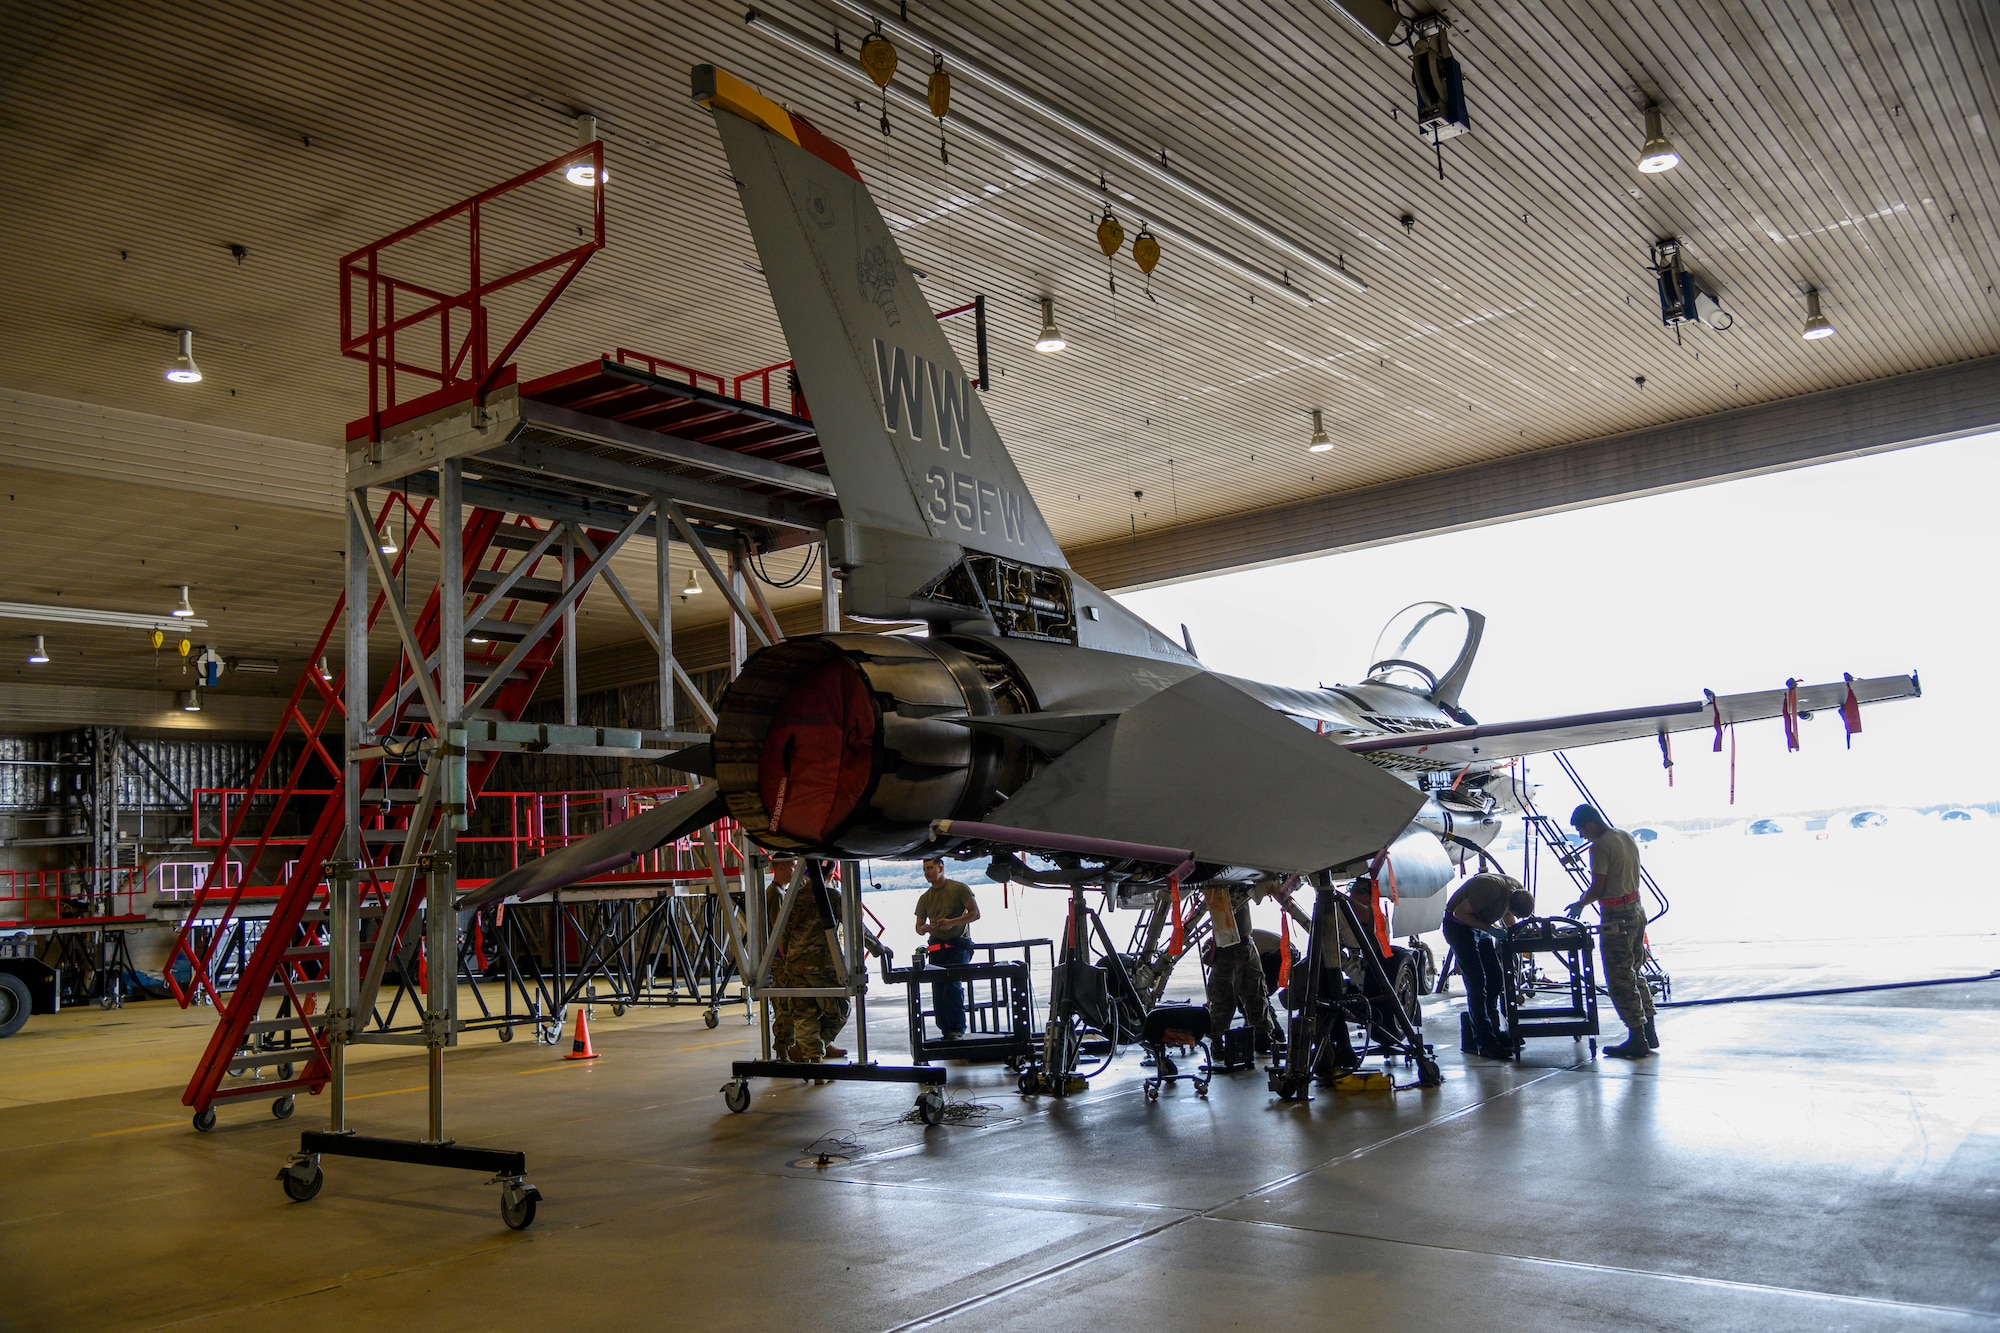 U.S. Air Force Airmen from the 35th Maintenance Squadron Phase Inspection section inspect an F-16 Fighting Falcon at Misawa Air Base, Japan, July 22, 2020. The 35th MXS Phase Inspection section Airmen thoroughly inspect and identify discrepancies before they become big problems, allowing Misawa jets to be at the ready for the mission. (U.S. Air Force photo by Airman 1st Class China M. Shock)